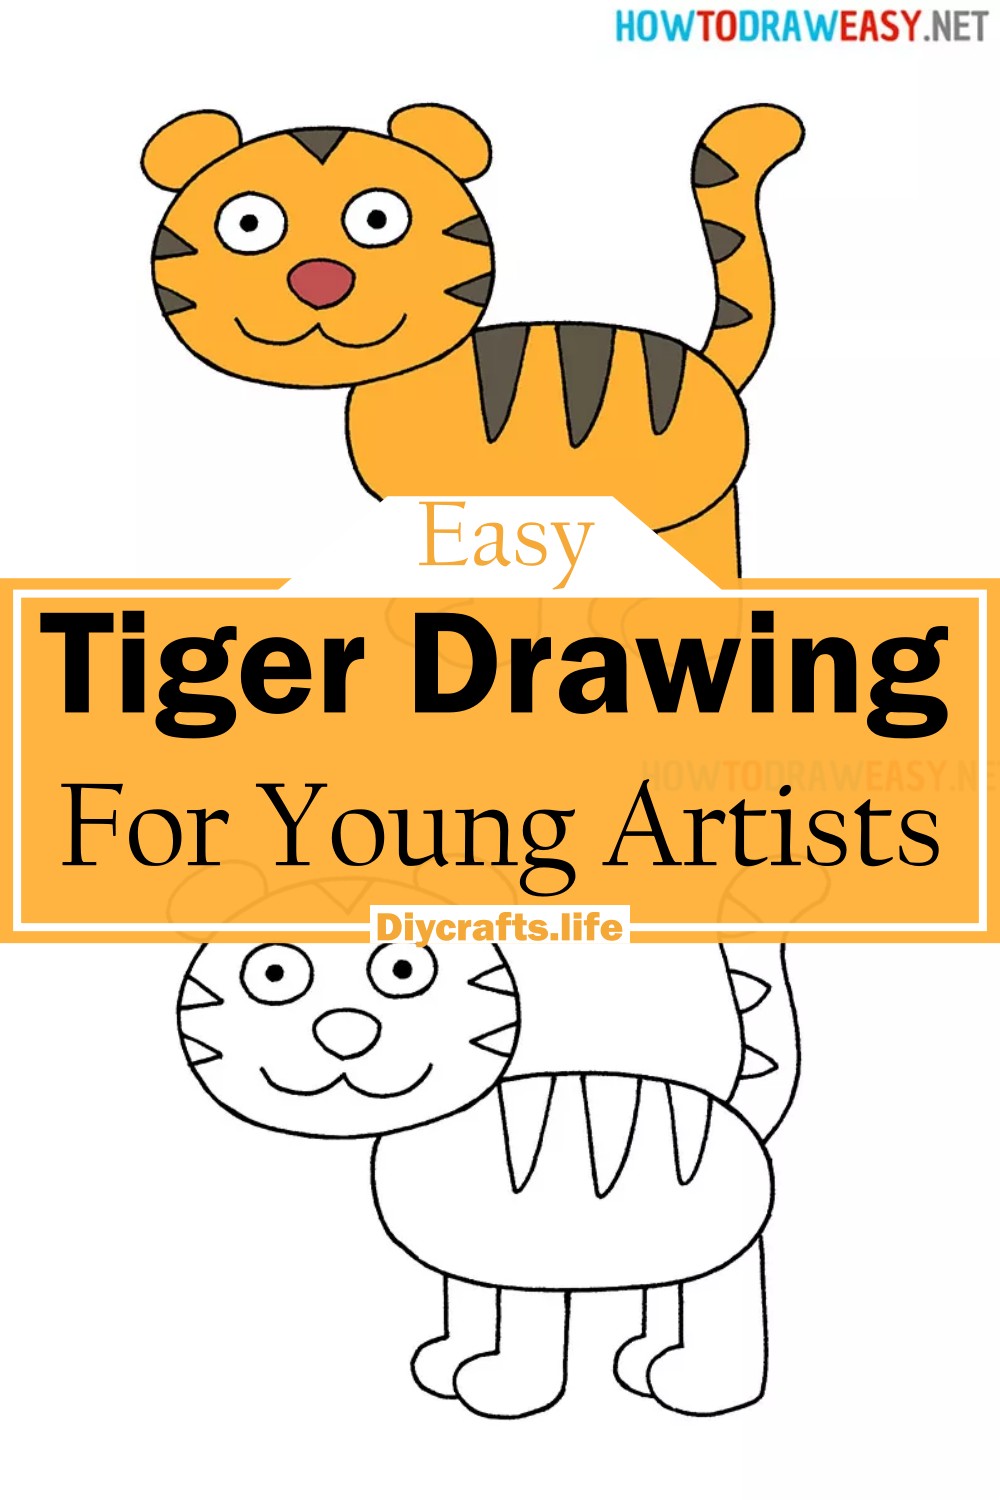 Tiger Drawing For Young Artists